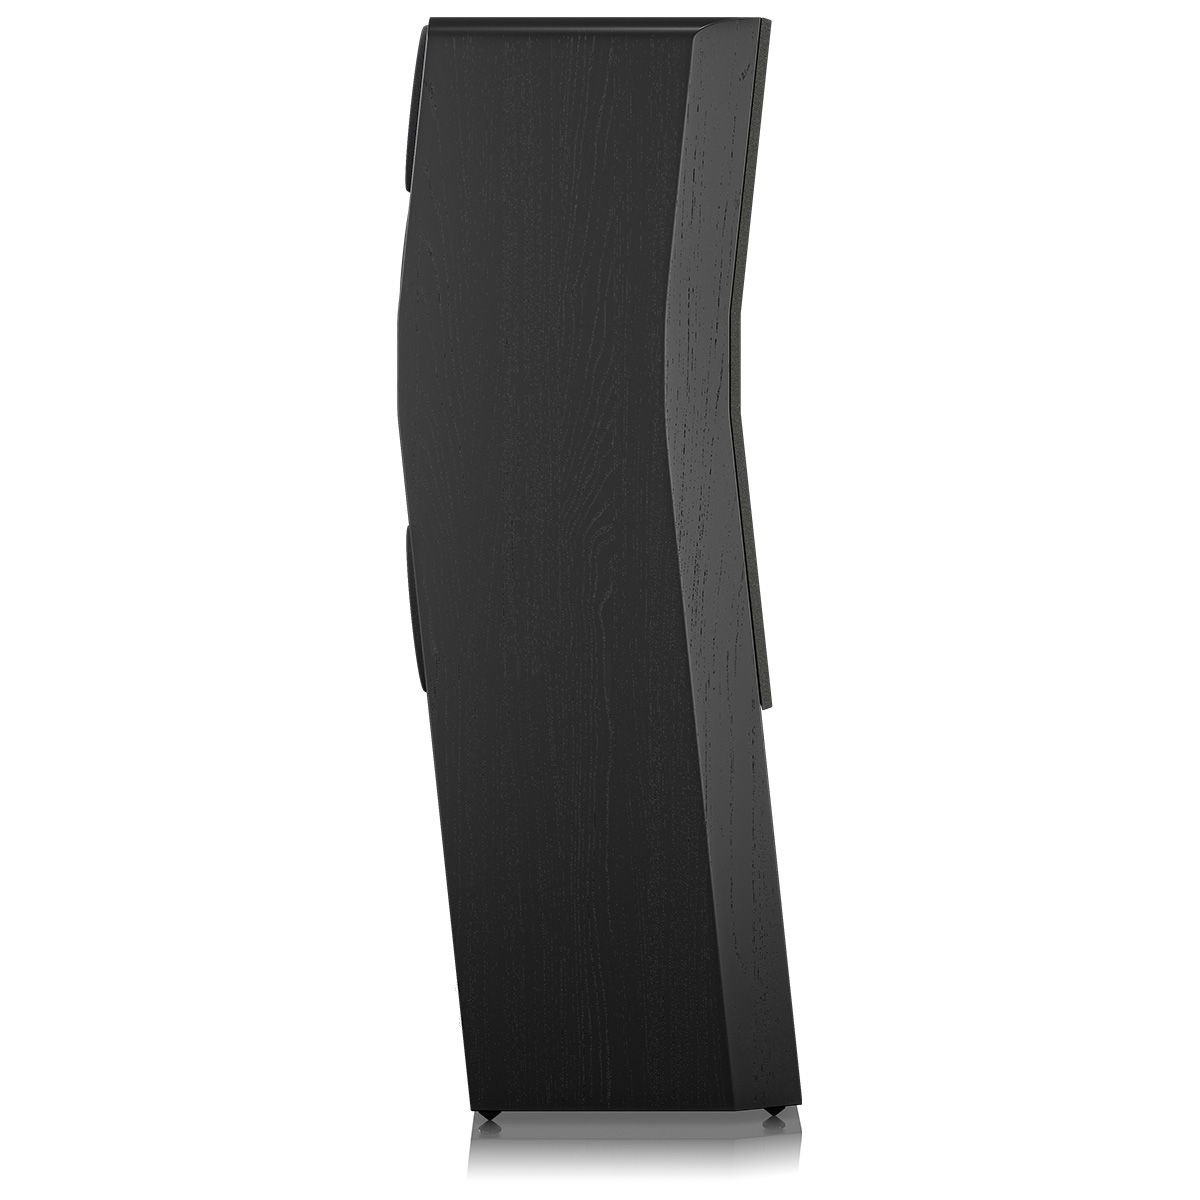 SVS Ultra Evolution Titan Floorstanding Loudspeaker - single black oak with grille - angled rear view without components